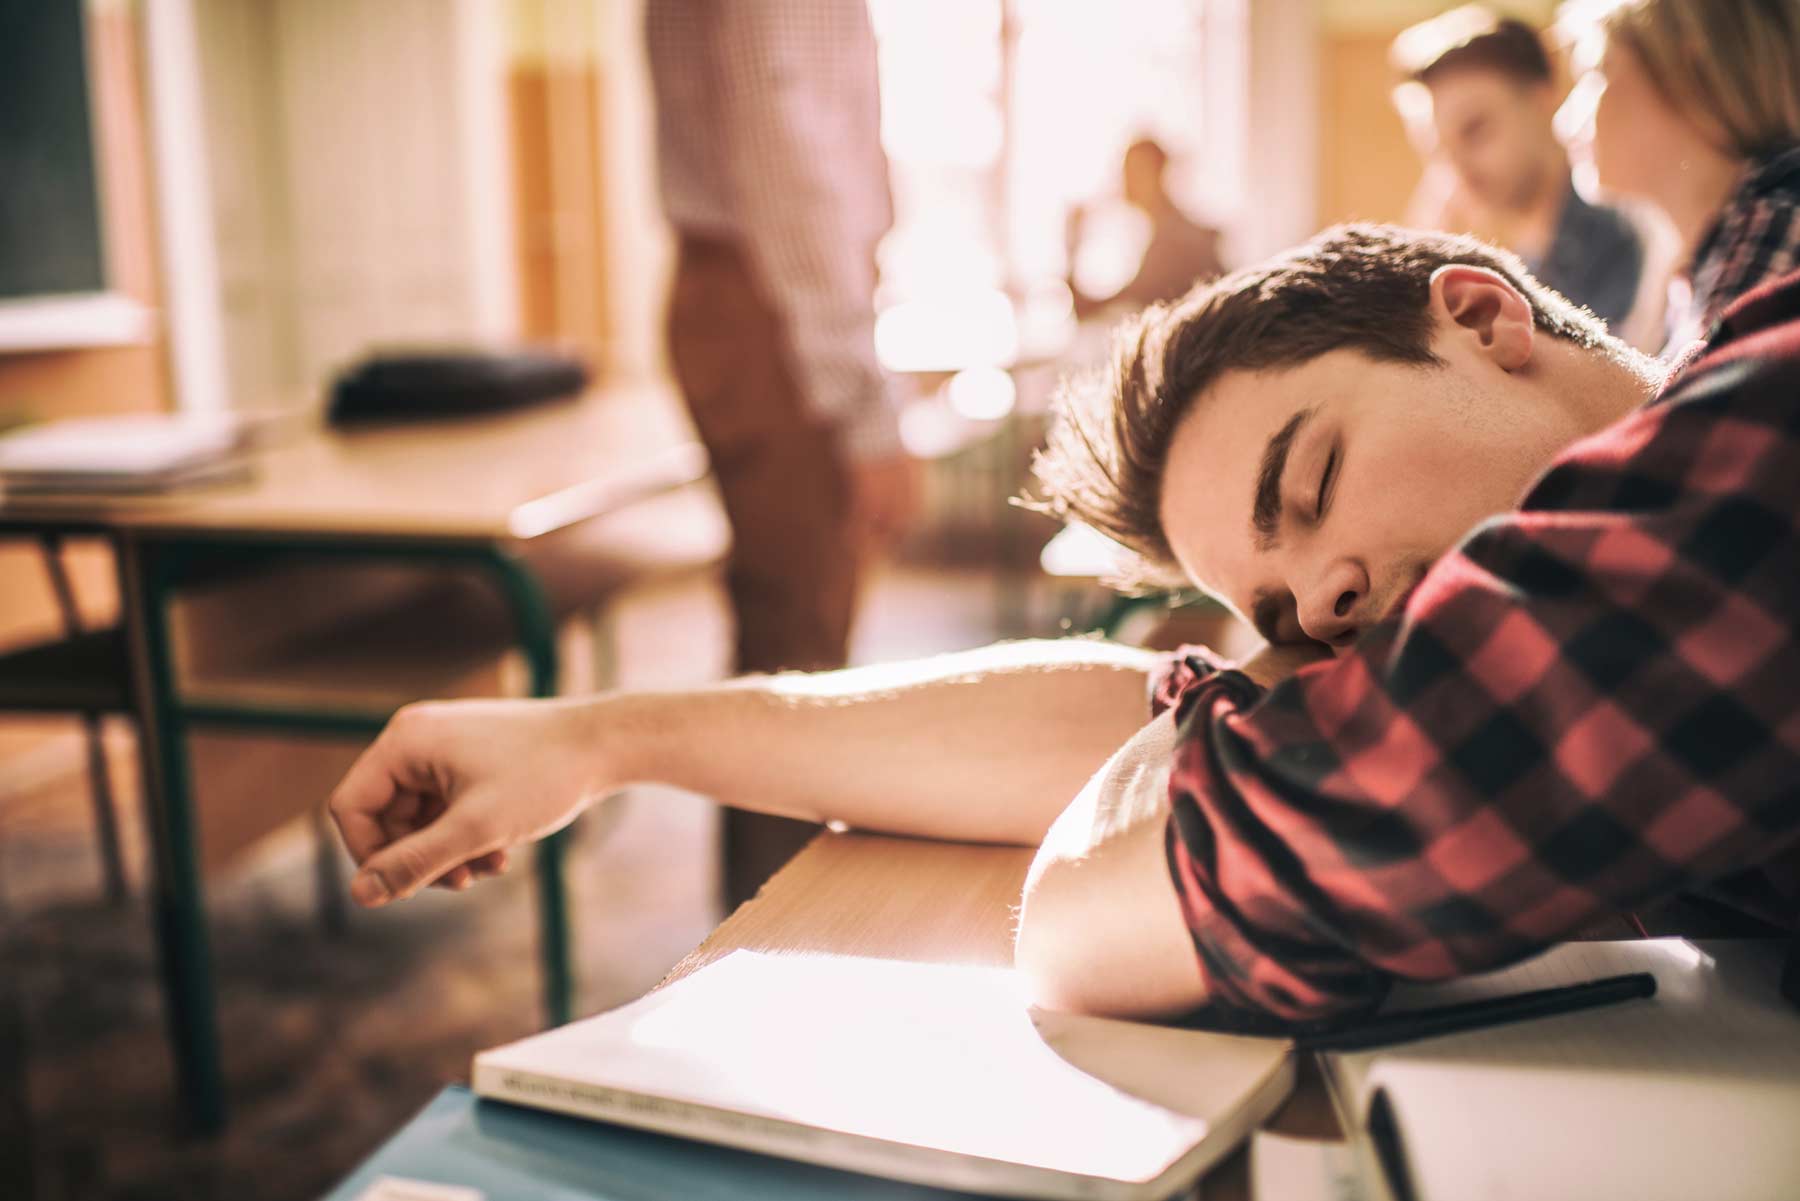 A teenager sleeps on his desk during class.